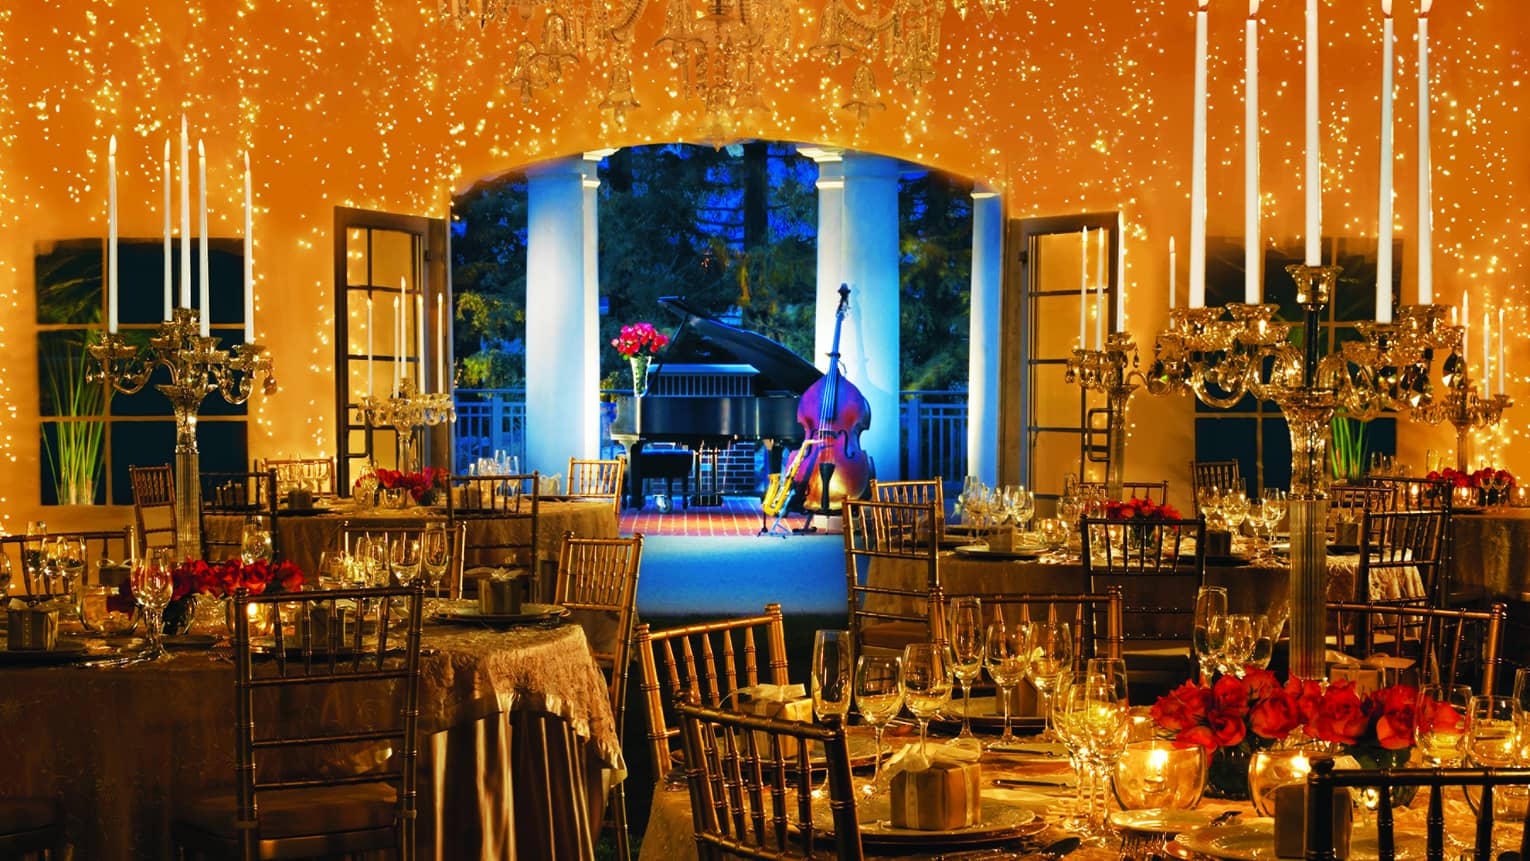 Interior of garden tent with dining tables, candelabras, red roses, romantic lighting, overlooking musical instruments 